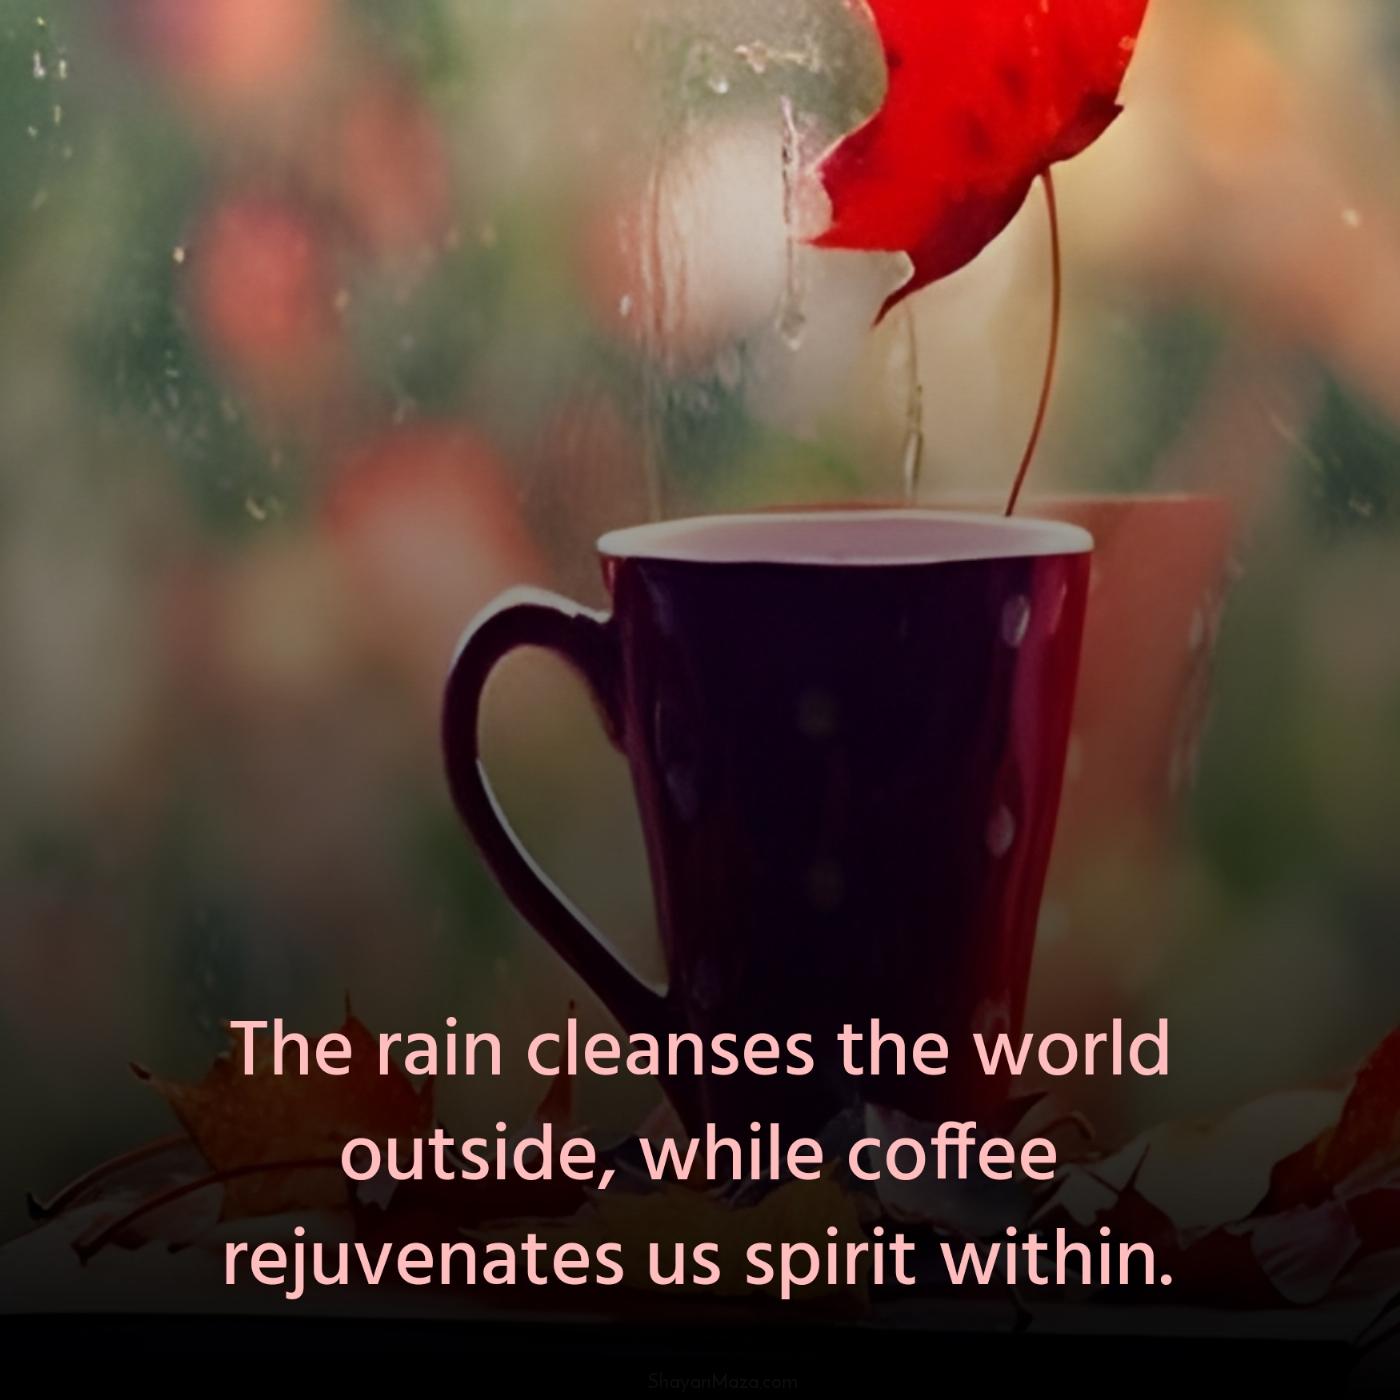 The rain cleanses the world outside while coffee rejuvenates